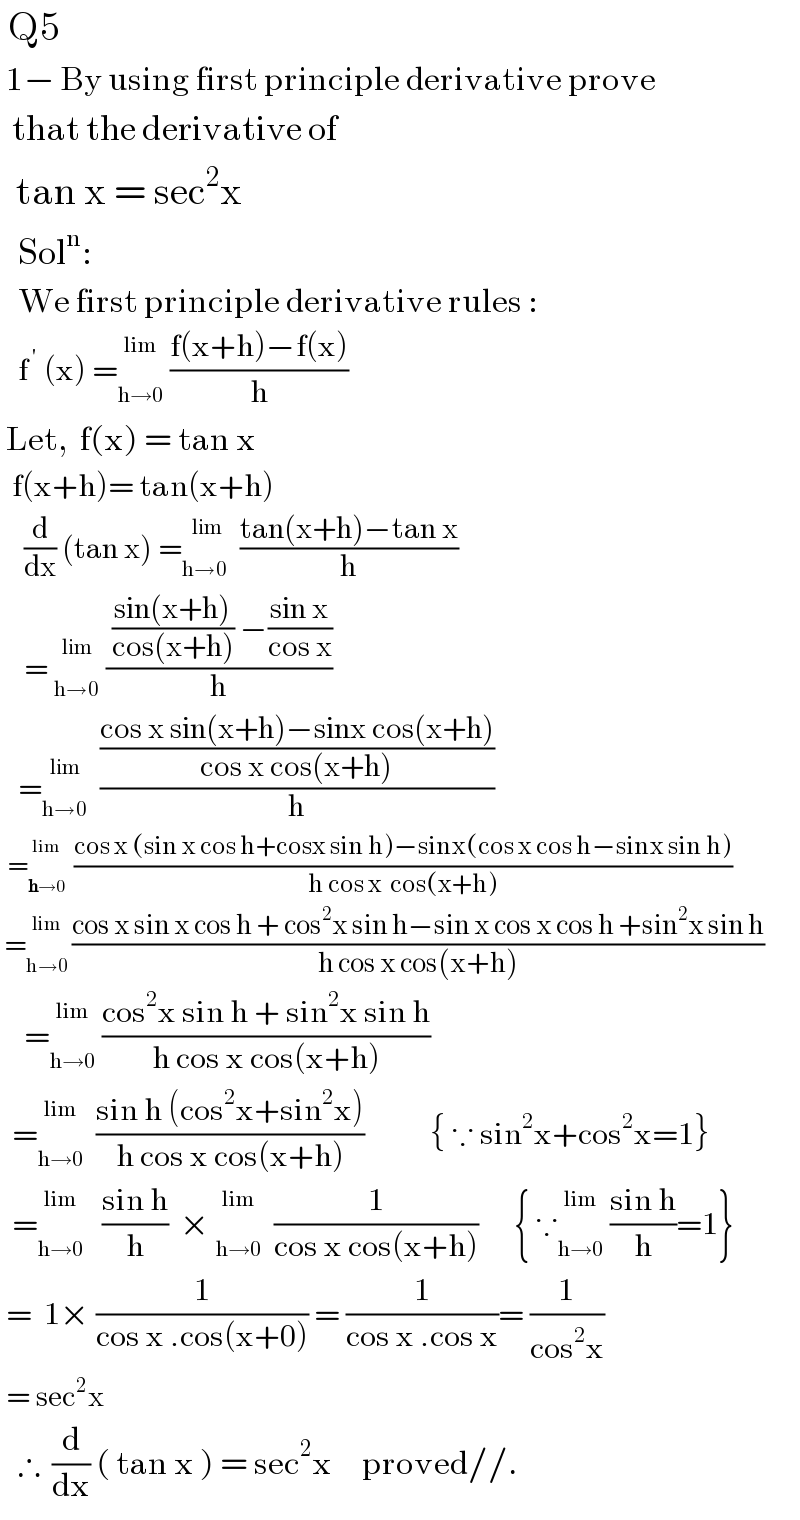  Q5   1− By using first principle derivative prove    that the derivative of    tan x = sec^2 x     Sol^n :        We first principle derivative rules :     f^( ′)  (x) = _(h→0) ^(lim)  ((f(x+h)−f(x))/h)   Let,  f(x) = tan x    f(x+h)= tan(x+h)      (d/dx) (tan x) = _(h→0) ^( lim)   ((tan(x+h)−tan x)/h)      =  _(h→0) ^(lim)  (( ((sin(x+h))/(cos(x+h))) −((sin x)/(cos x)))/h)     = _(h→0) ^(lim)   (((cos x sin(x+h)−sinx cos(x+h))/(cos x cos(x+h)))/h)    = _(h→0) ^(lim)   ((cos x (sin x cos h+cosx sin h)−sinx(cos x cos h−sinx sin h))/(h cos x  cos(x+h)))   = _(h→0) ^(lim)  ((cos x sin x cos h + cos^2 x sin h−sin x cos x cos h +sin^2 x sin h)/(h cos x cos(x+h)))      = _(h→0) ^(lim)  ((cos^2 x sin h + sin^2 x sin h)/(h cos x cos(x+h)))    = _(h→0) ^(lim)   ((sin h (cos^2 x+sin^2 x))/(h cos x cos(x+h)))           { ∵ sin^2 x+cos^2 x=1}    = _(h→0) ^(lim)    ((sin h)/h)  ×  _(h→0) ^(lim)   (1/(cos x cos(x+h)))      { ∵ _(h→0) ^(lim)  ((sin h)/h)=1}   =  1× (1/(cos x .cos(x+0))) = (1/(cos x .cos x))= (1/(cos^2 x))   = sec^2 x     ∴  (d/dx) ( tan x ) = sec^2 x     proved//.  